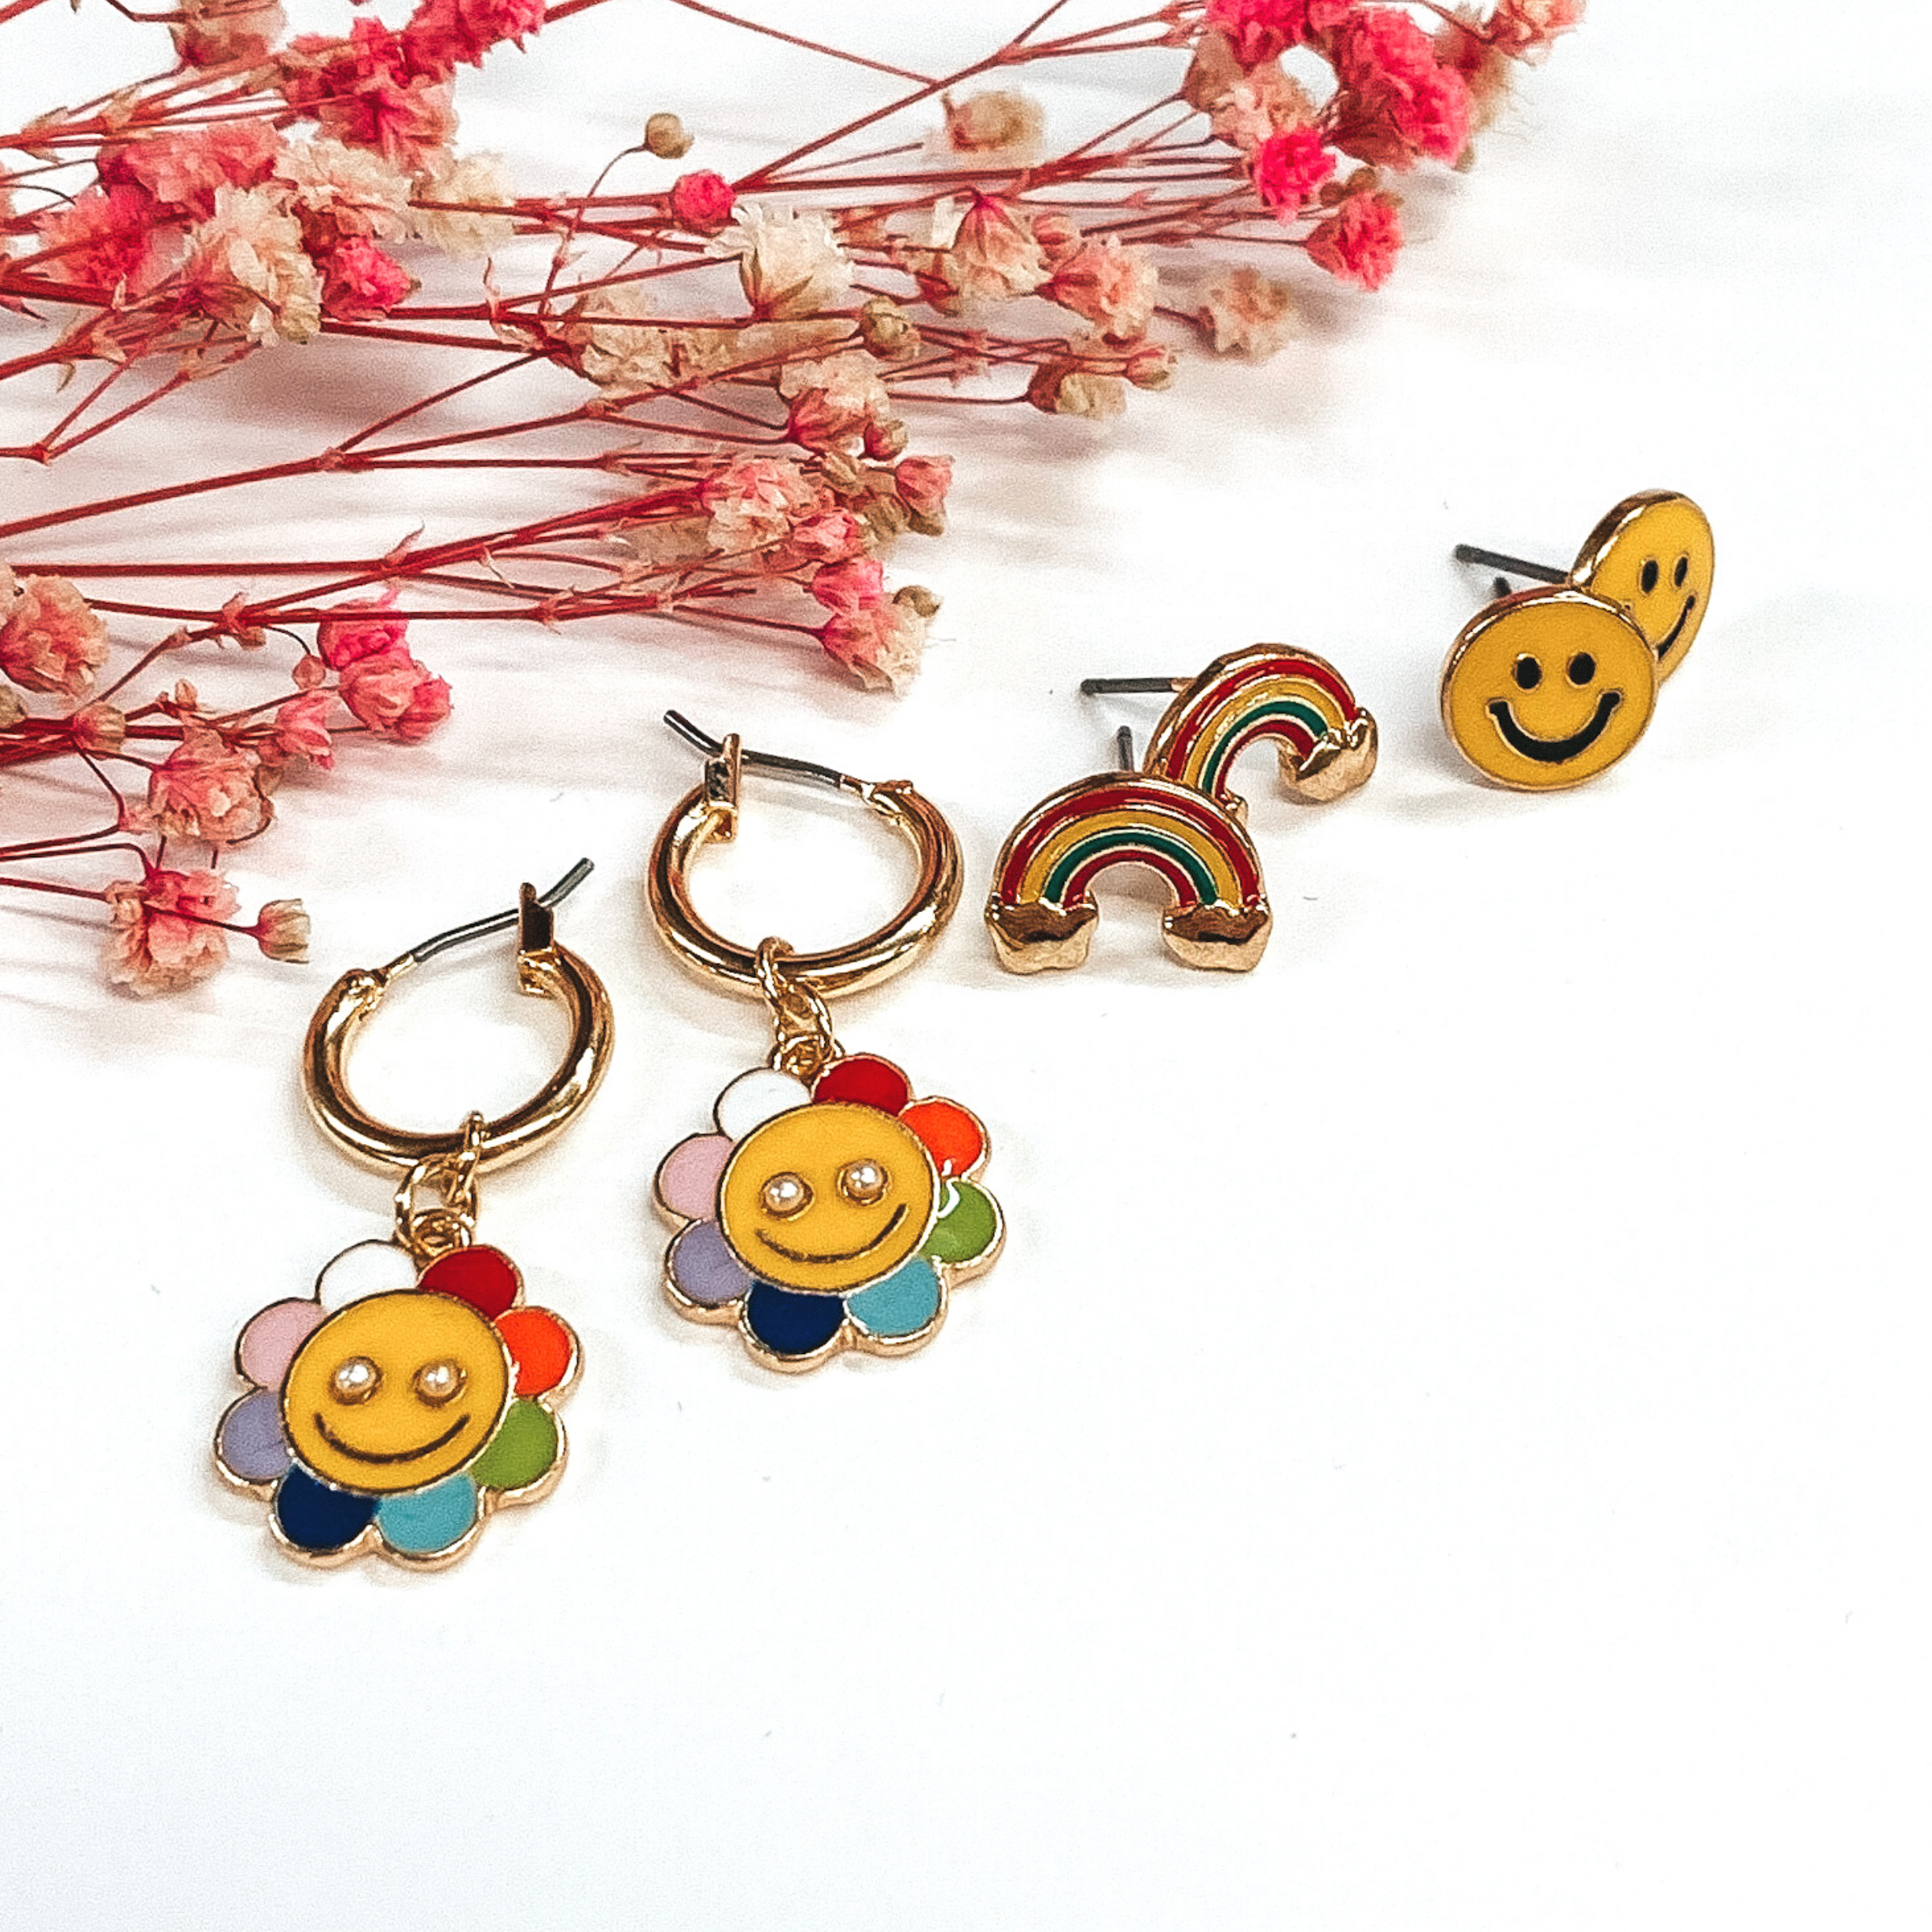 This earring set includes yellow smiley face studs, rainbow studs, and tiny gold hoops with multicolored flower pendants with a smiley face in the center. These earrings are pictured on a white background with pink babys breath. 